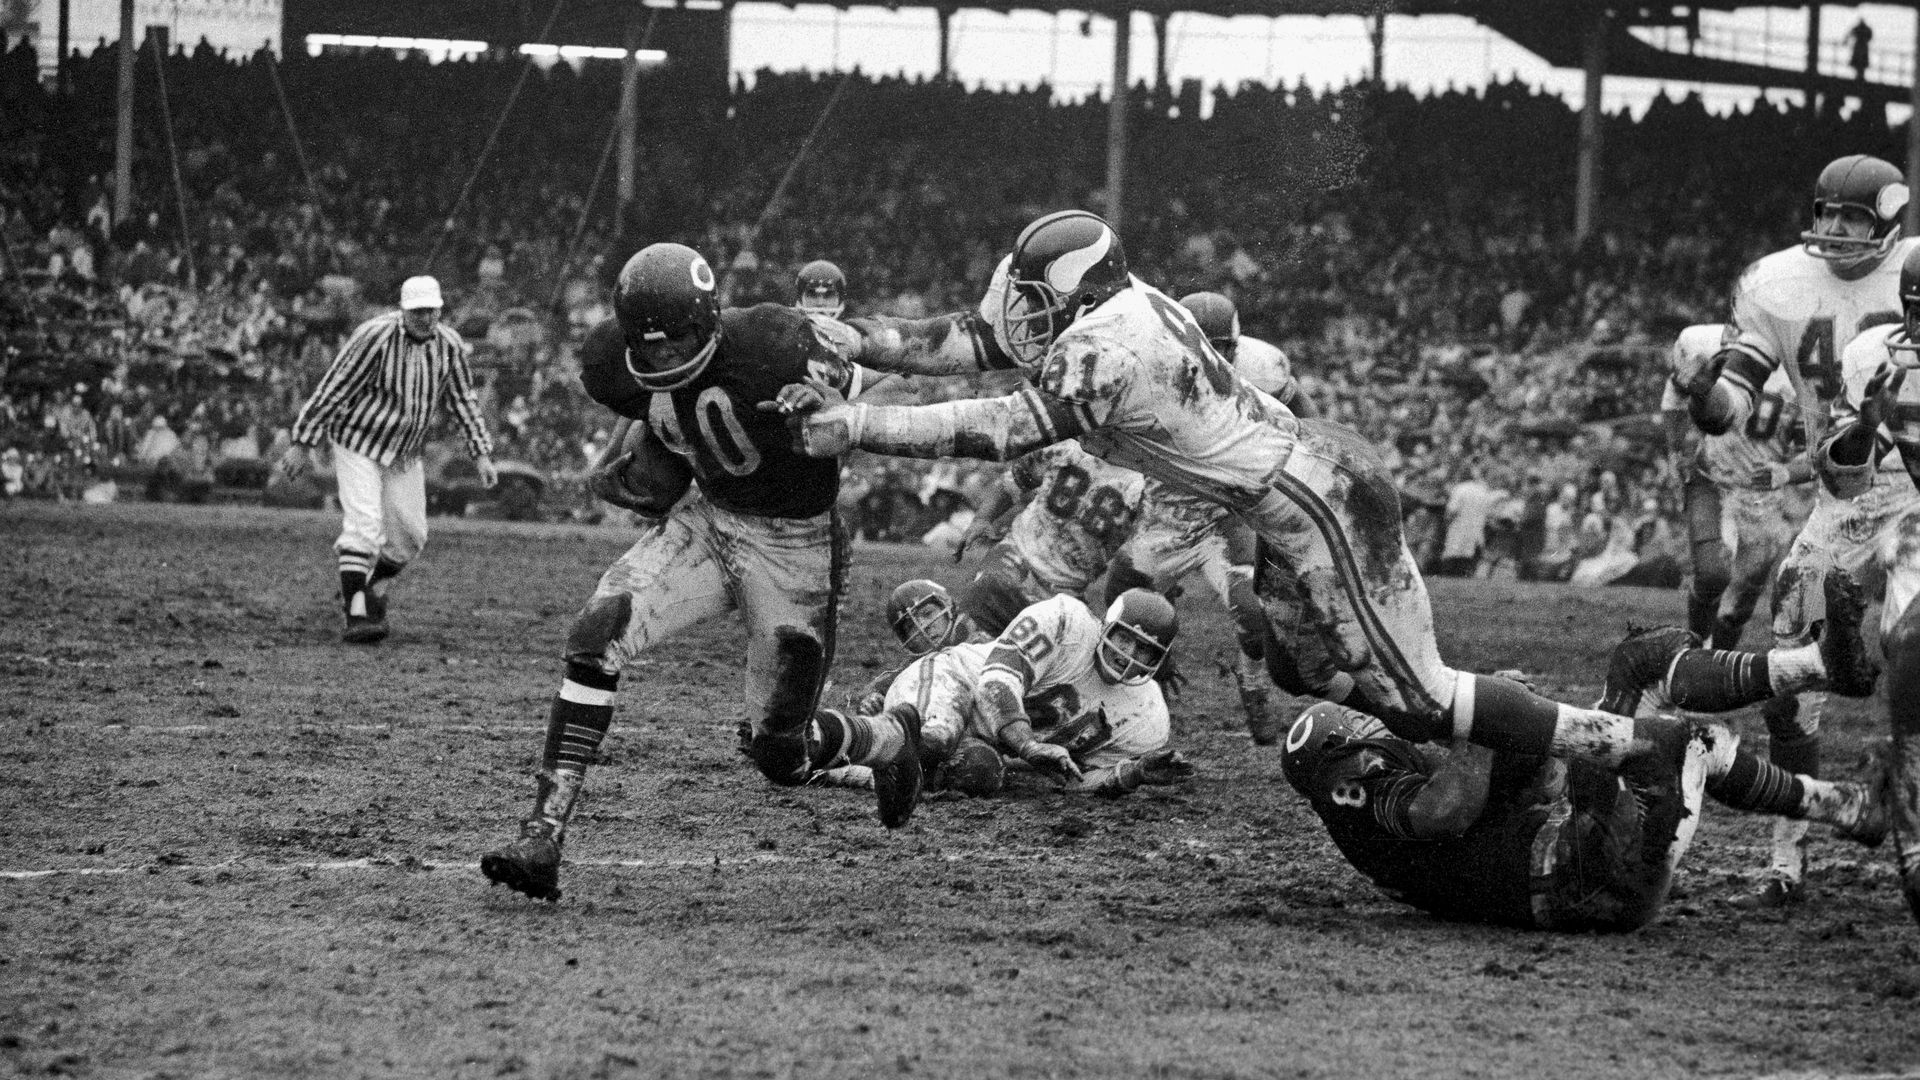 A photo of a football player breaking a tackle. 